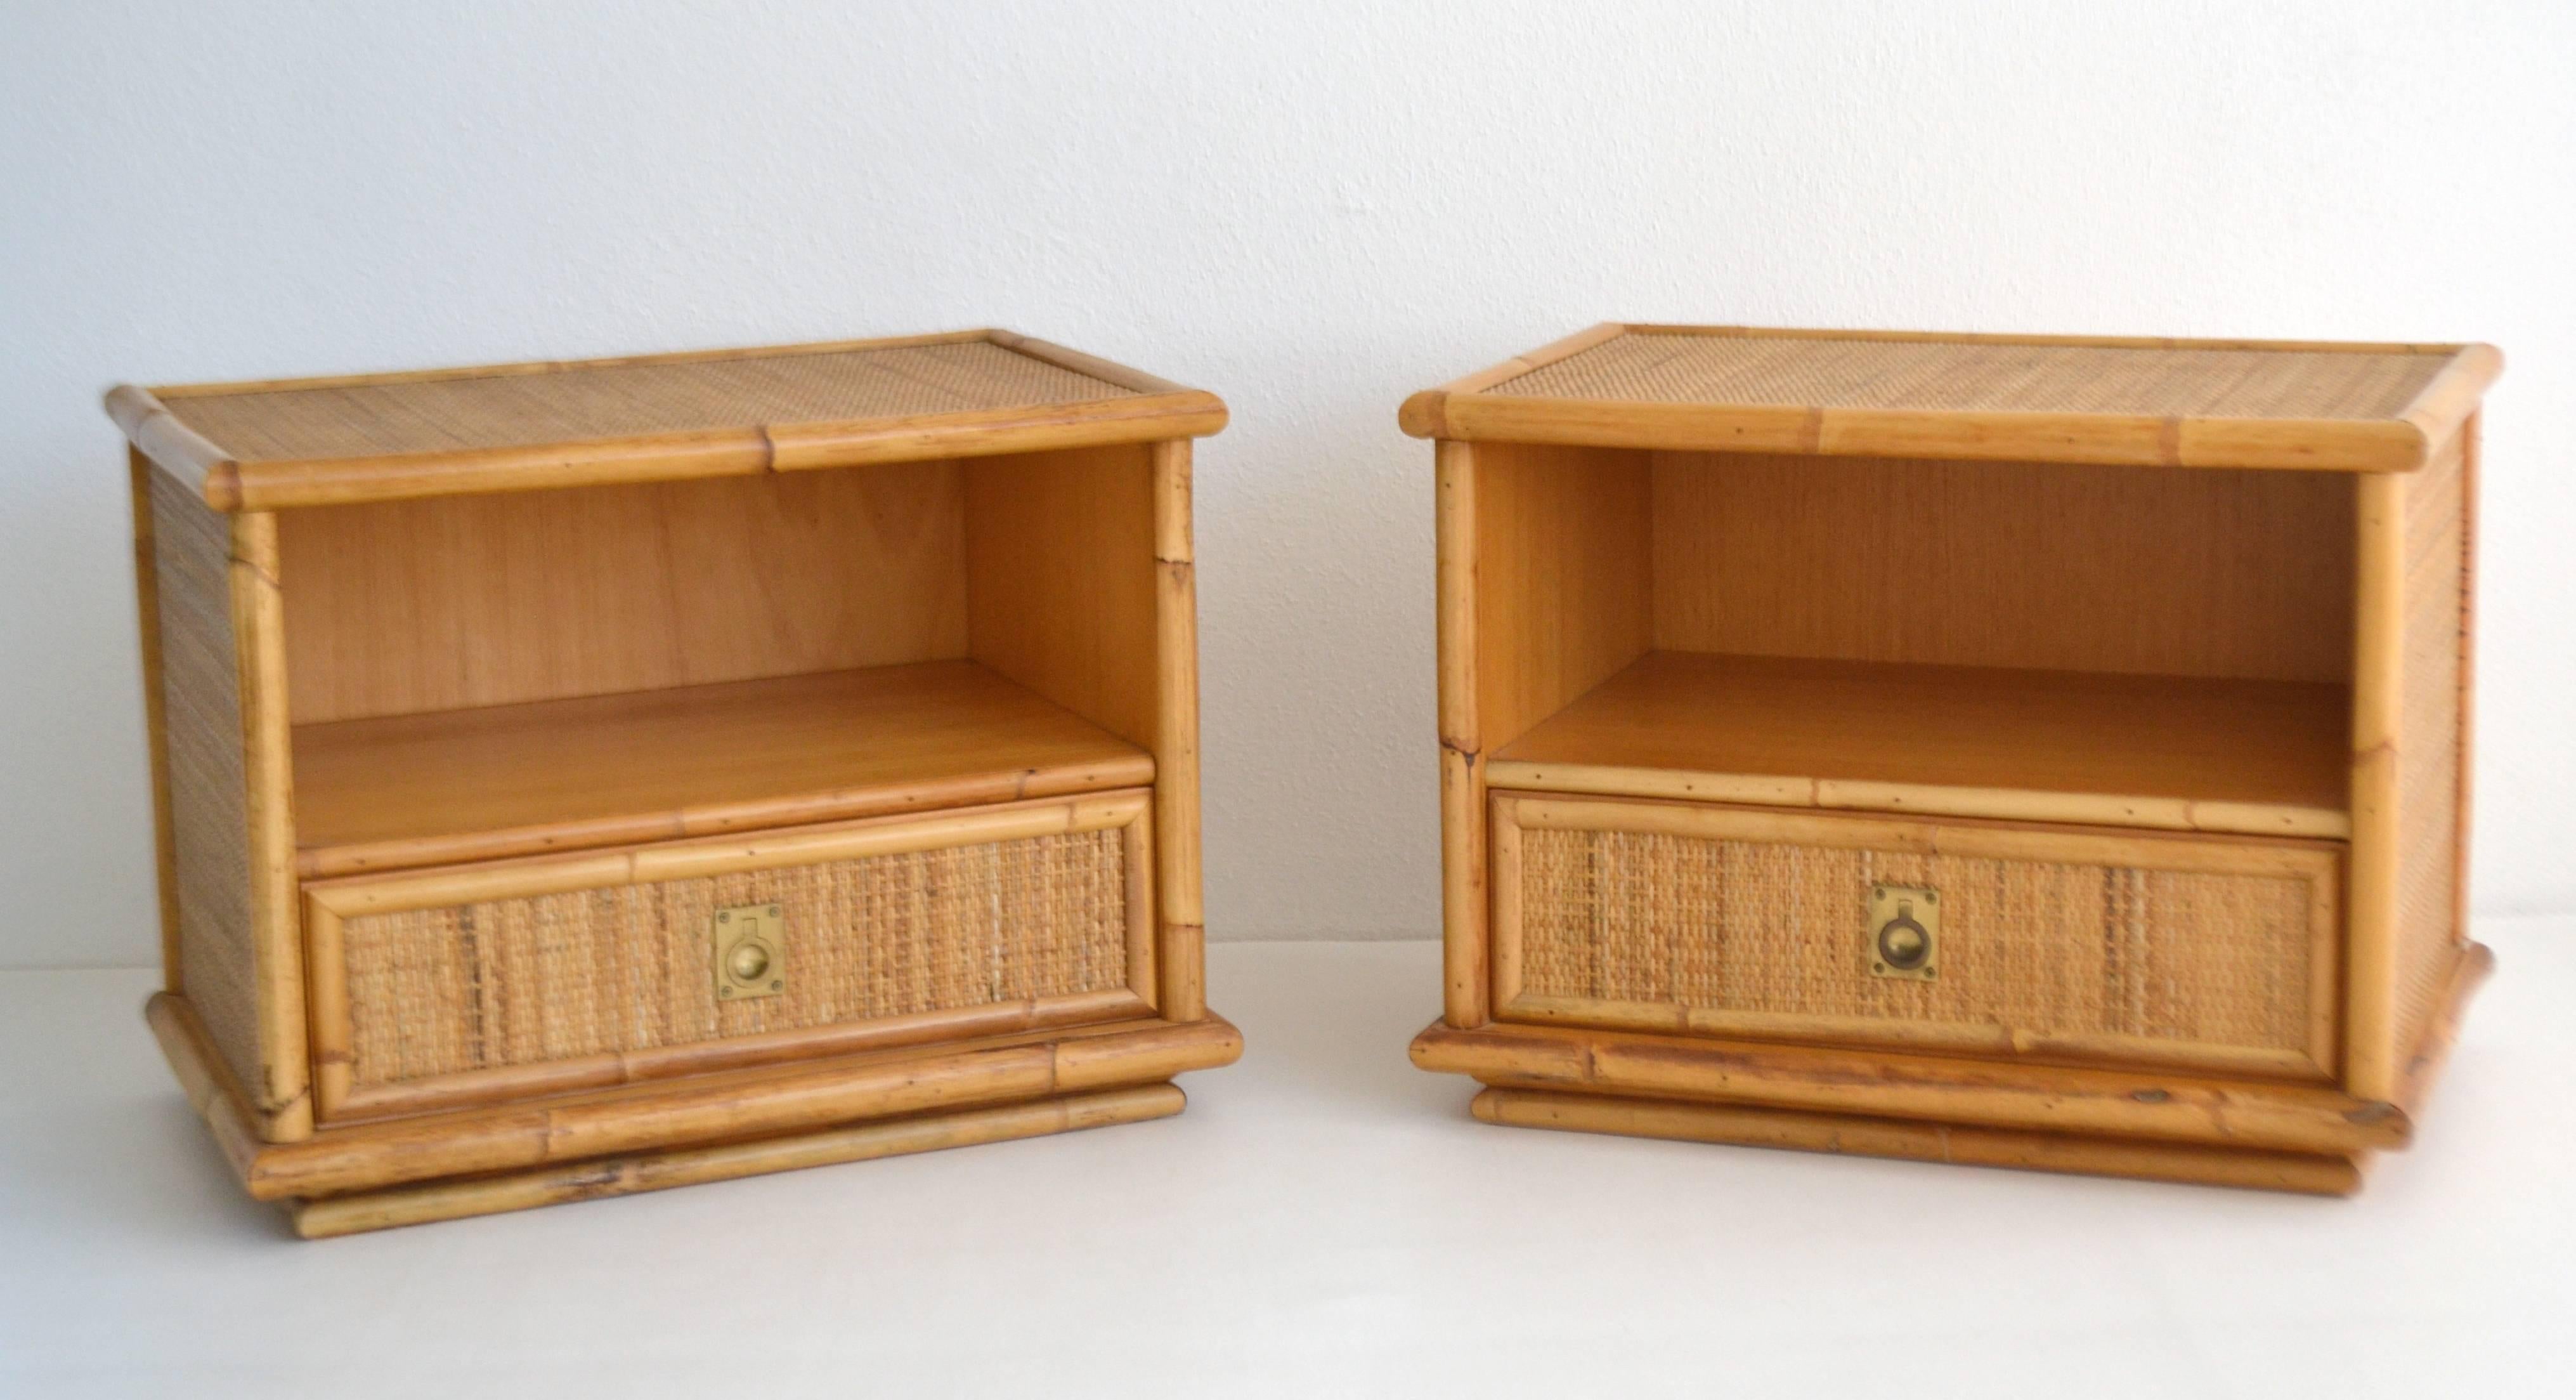 Pair of Italian Mid-Century Woven Rattan Side Tables or Nightstands 1